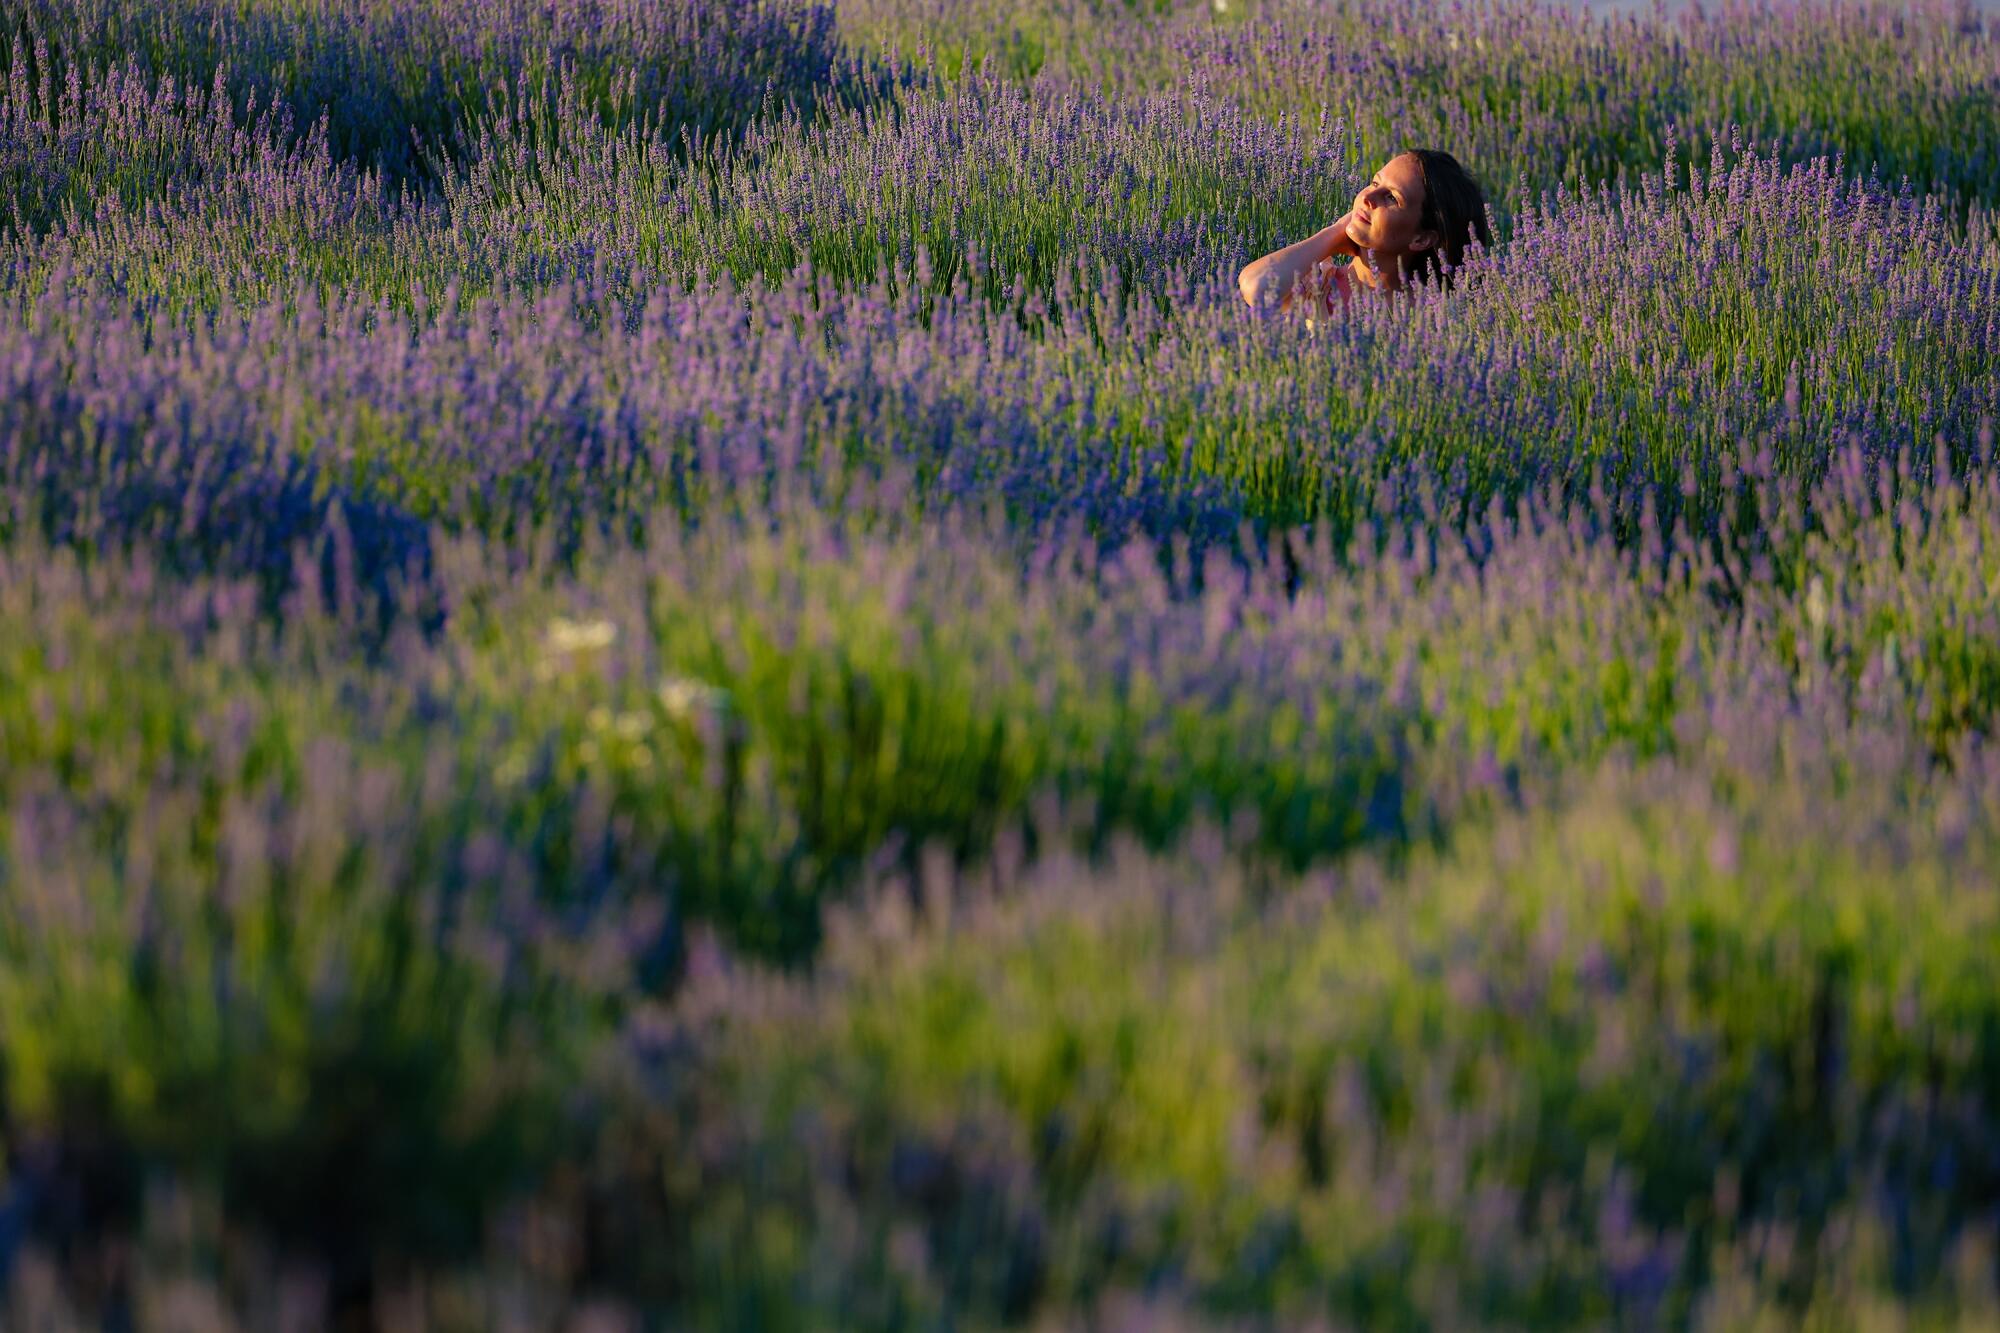 A woman is barely visible in a field of blooming lavender plants